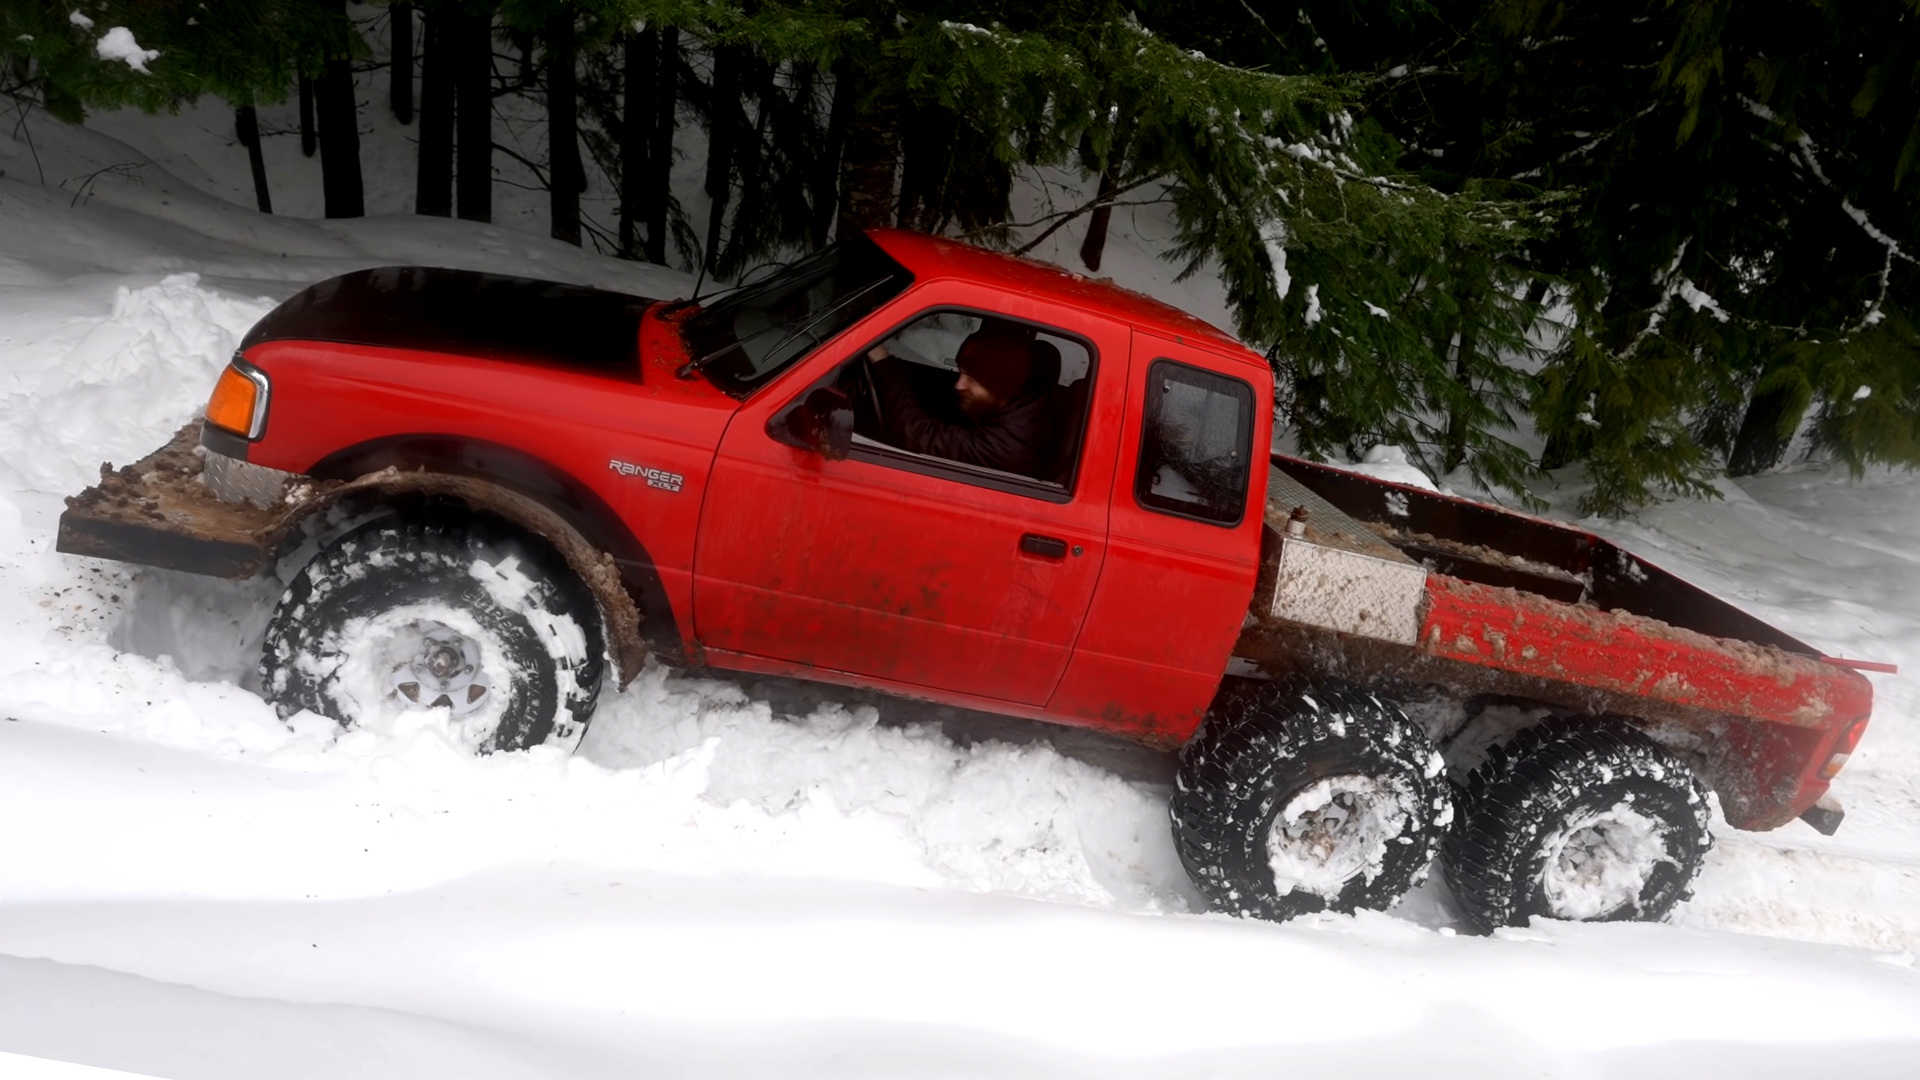 Watch This Homebrew 6x6 1995 Ford Ranger Tear Up The